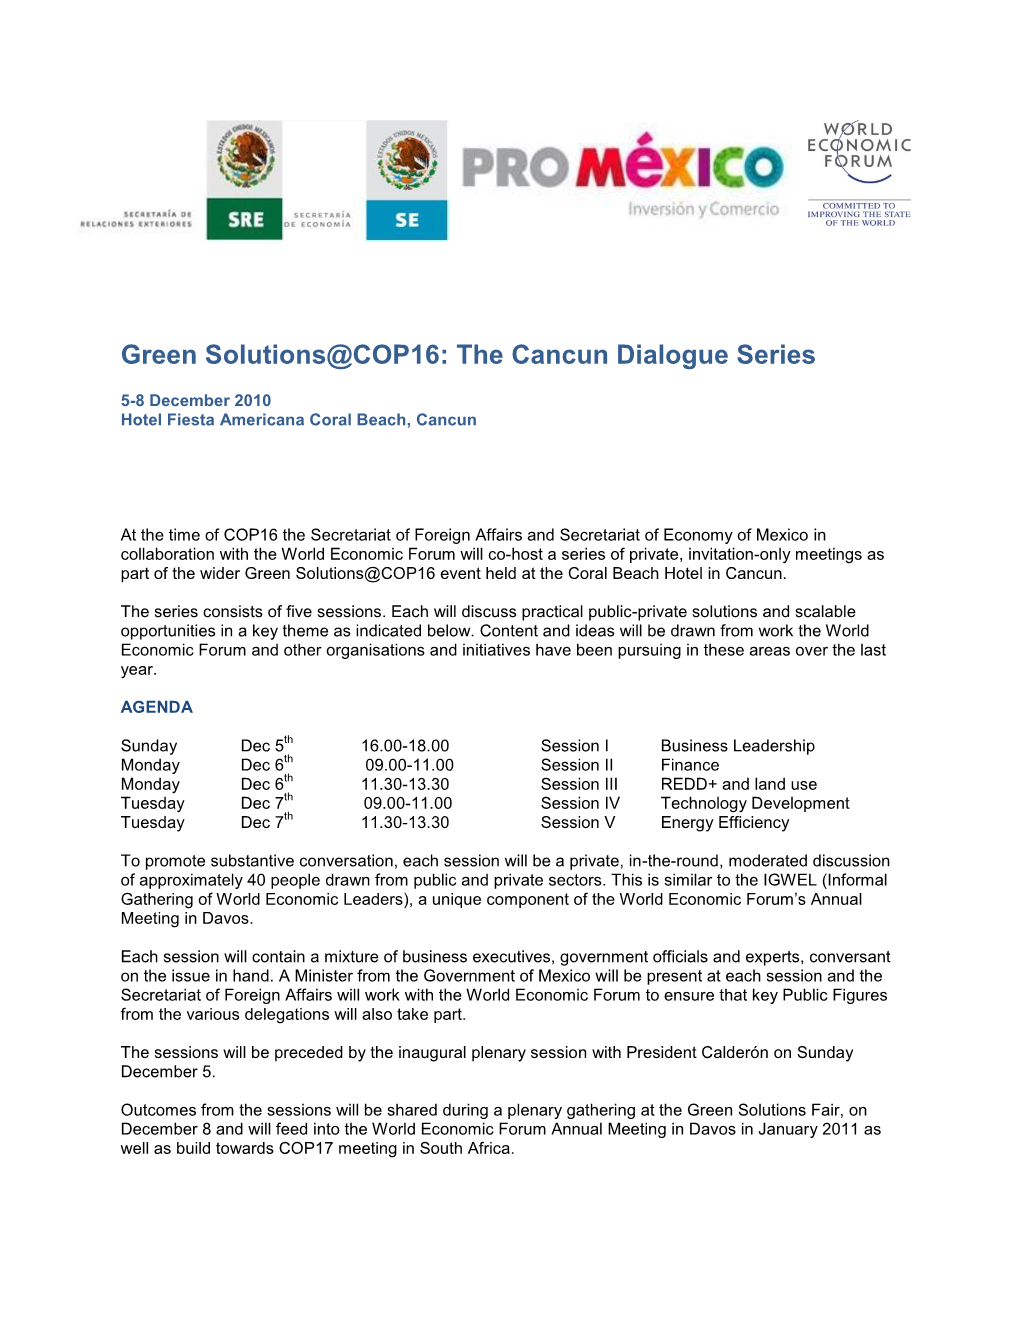 Green Solutions@COP16: the Cancun Dialogue Series